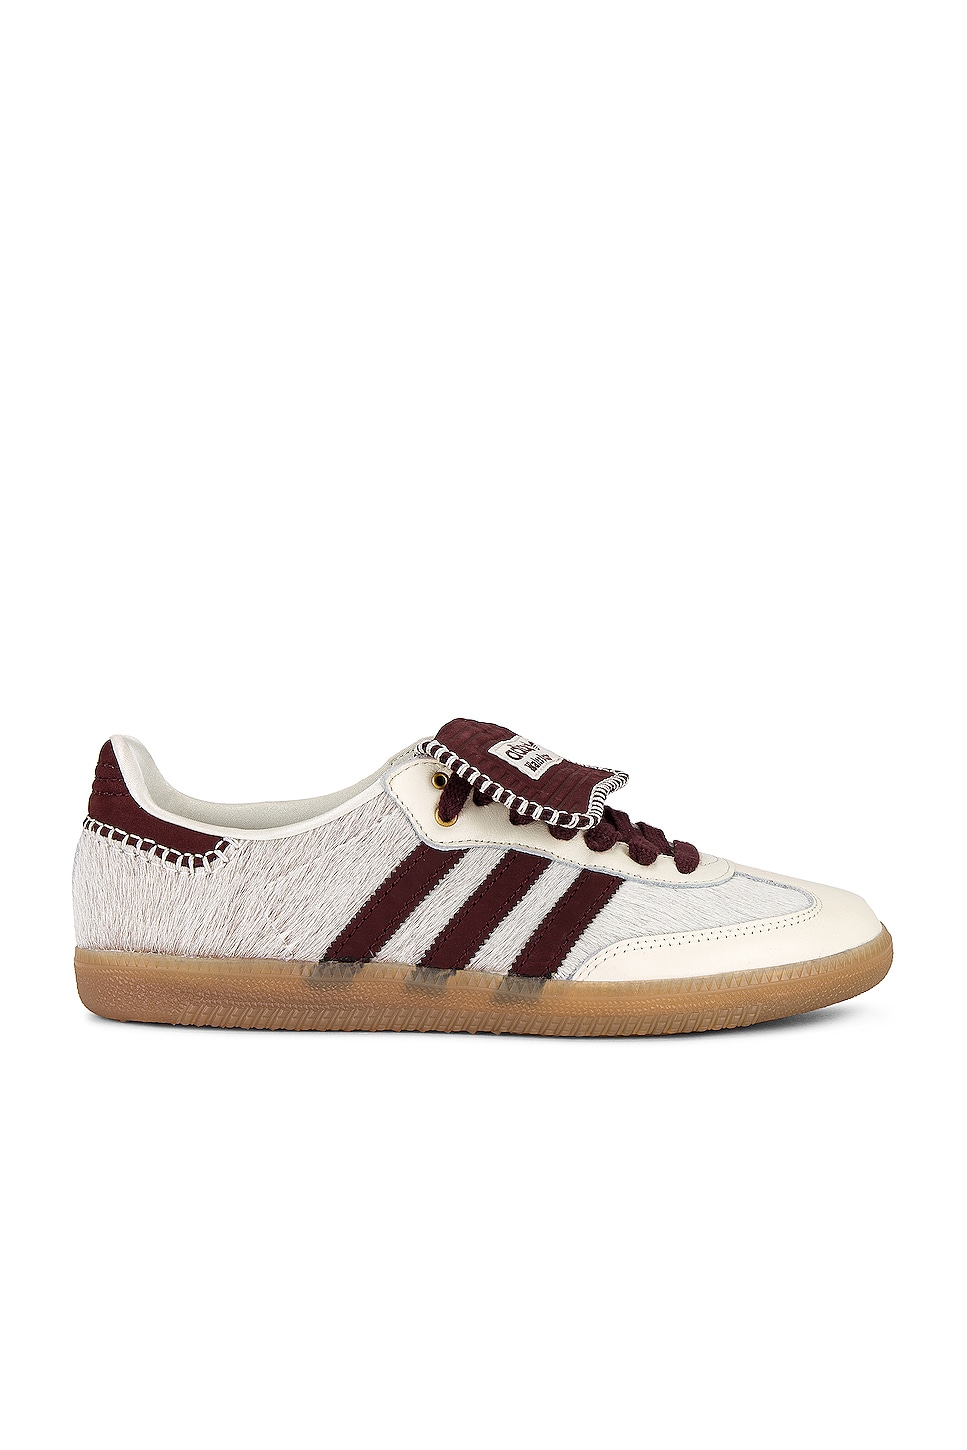 Image 1 of adidas by Wales Bonner Pony Tonal Samba Sneaker in Cream White & Mystery Brown